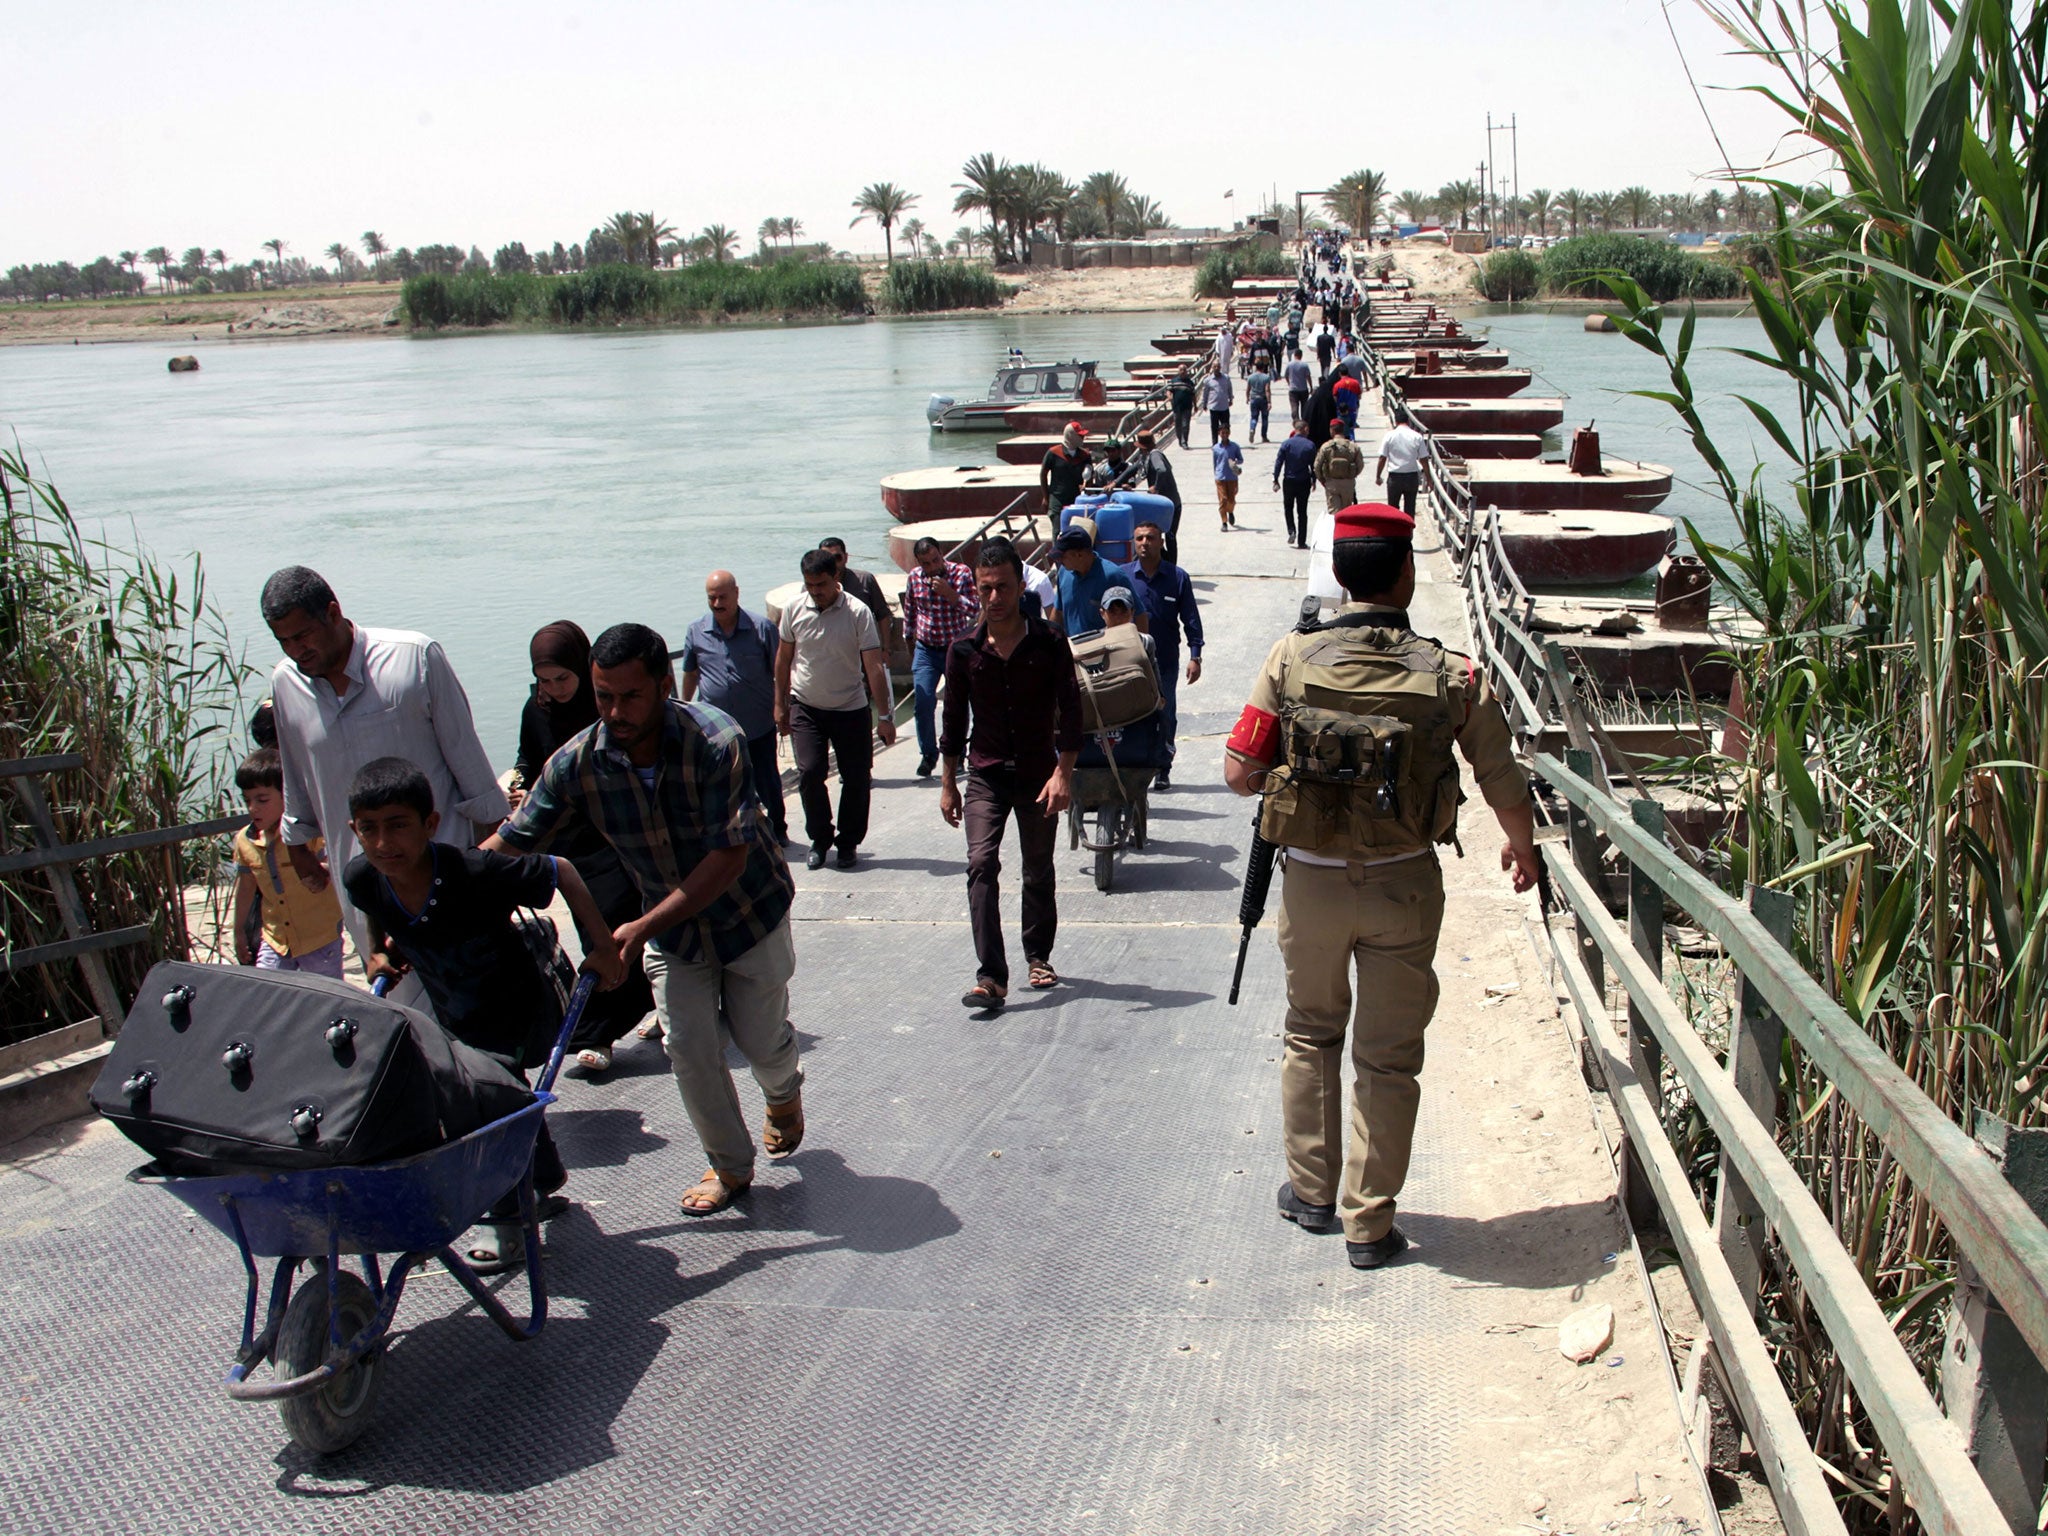 Displaced Iraqis who were forced to flee their hometown ahead of gains made by Islamic State (IS) militants in Ramadi city western Iraqi, cross the Bzebiz bridge on the Euphrates River on their way to Baghdad